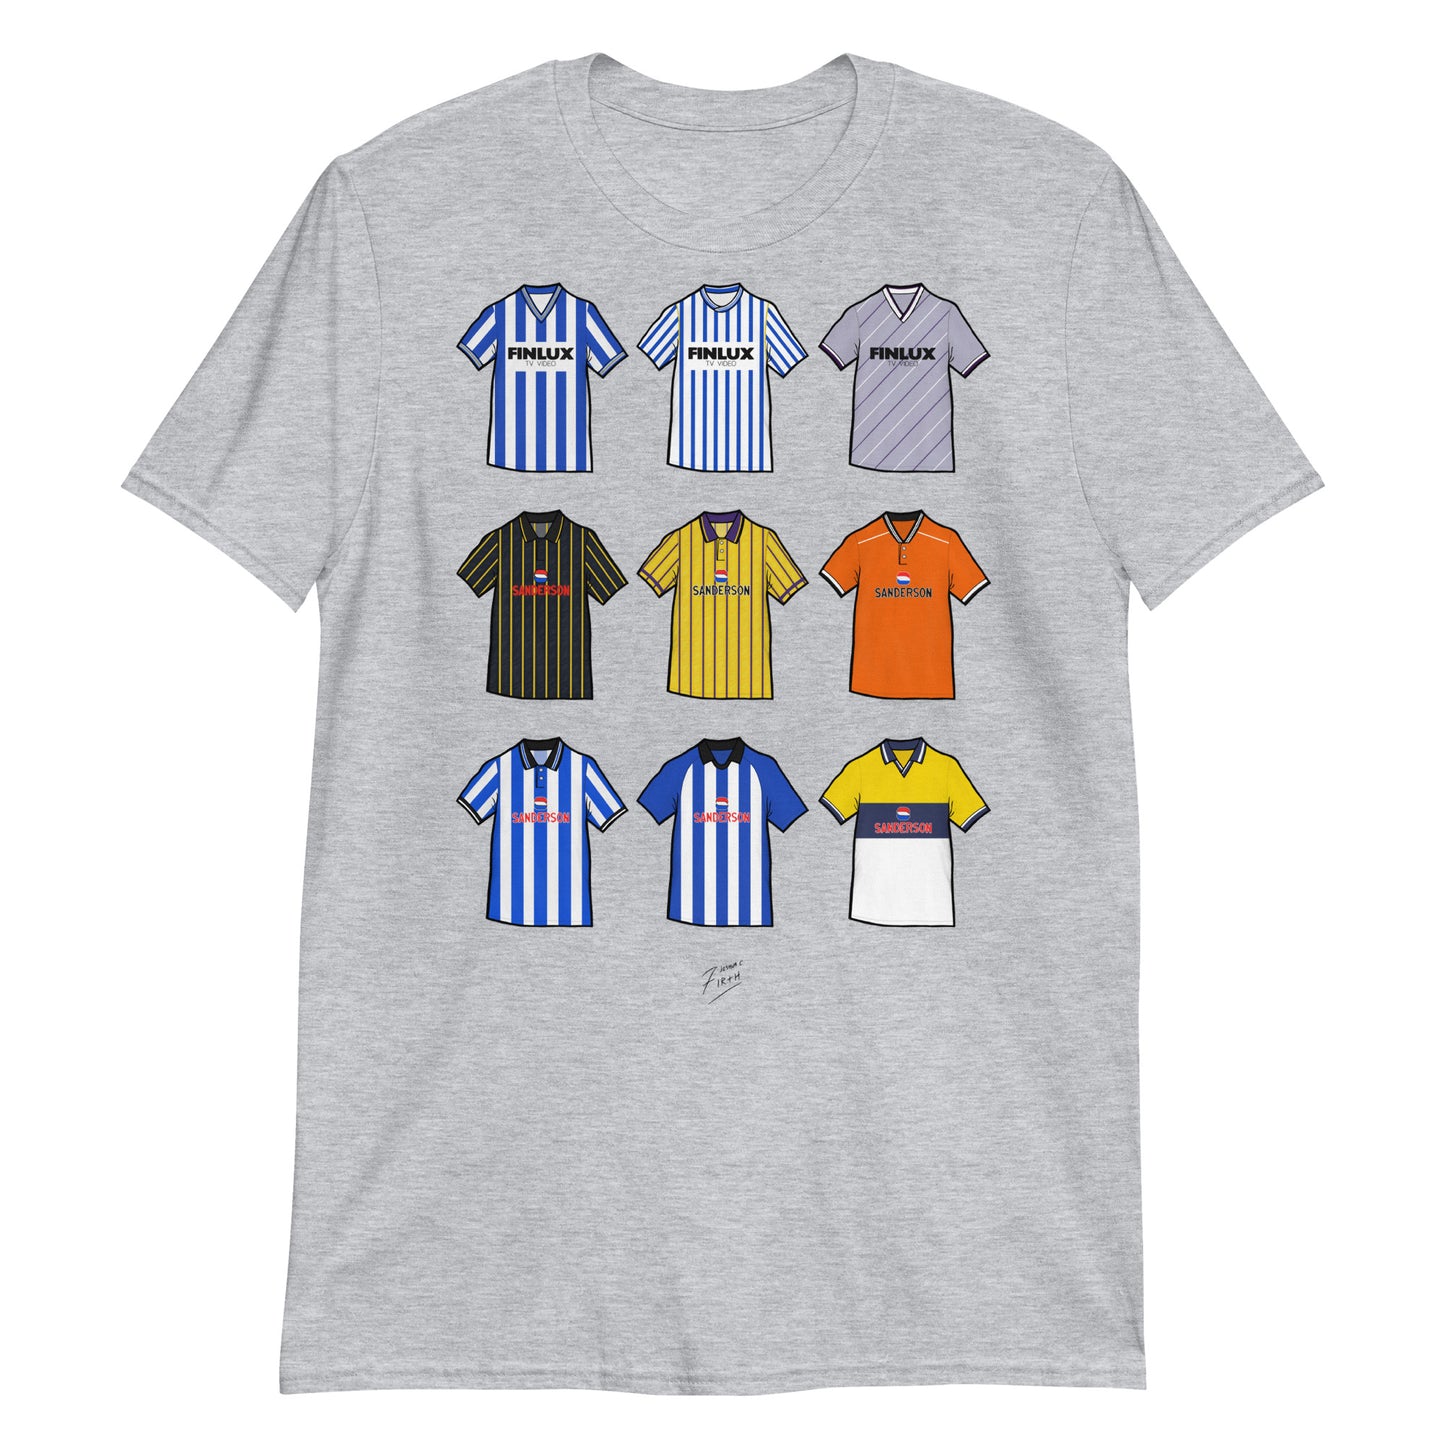 Light Grey Sheffield Wednesday themed T-shirt inspired by their famous retro jerseys of the past! 